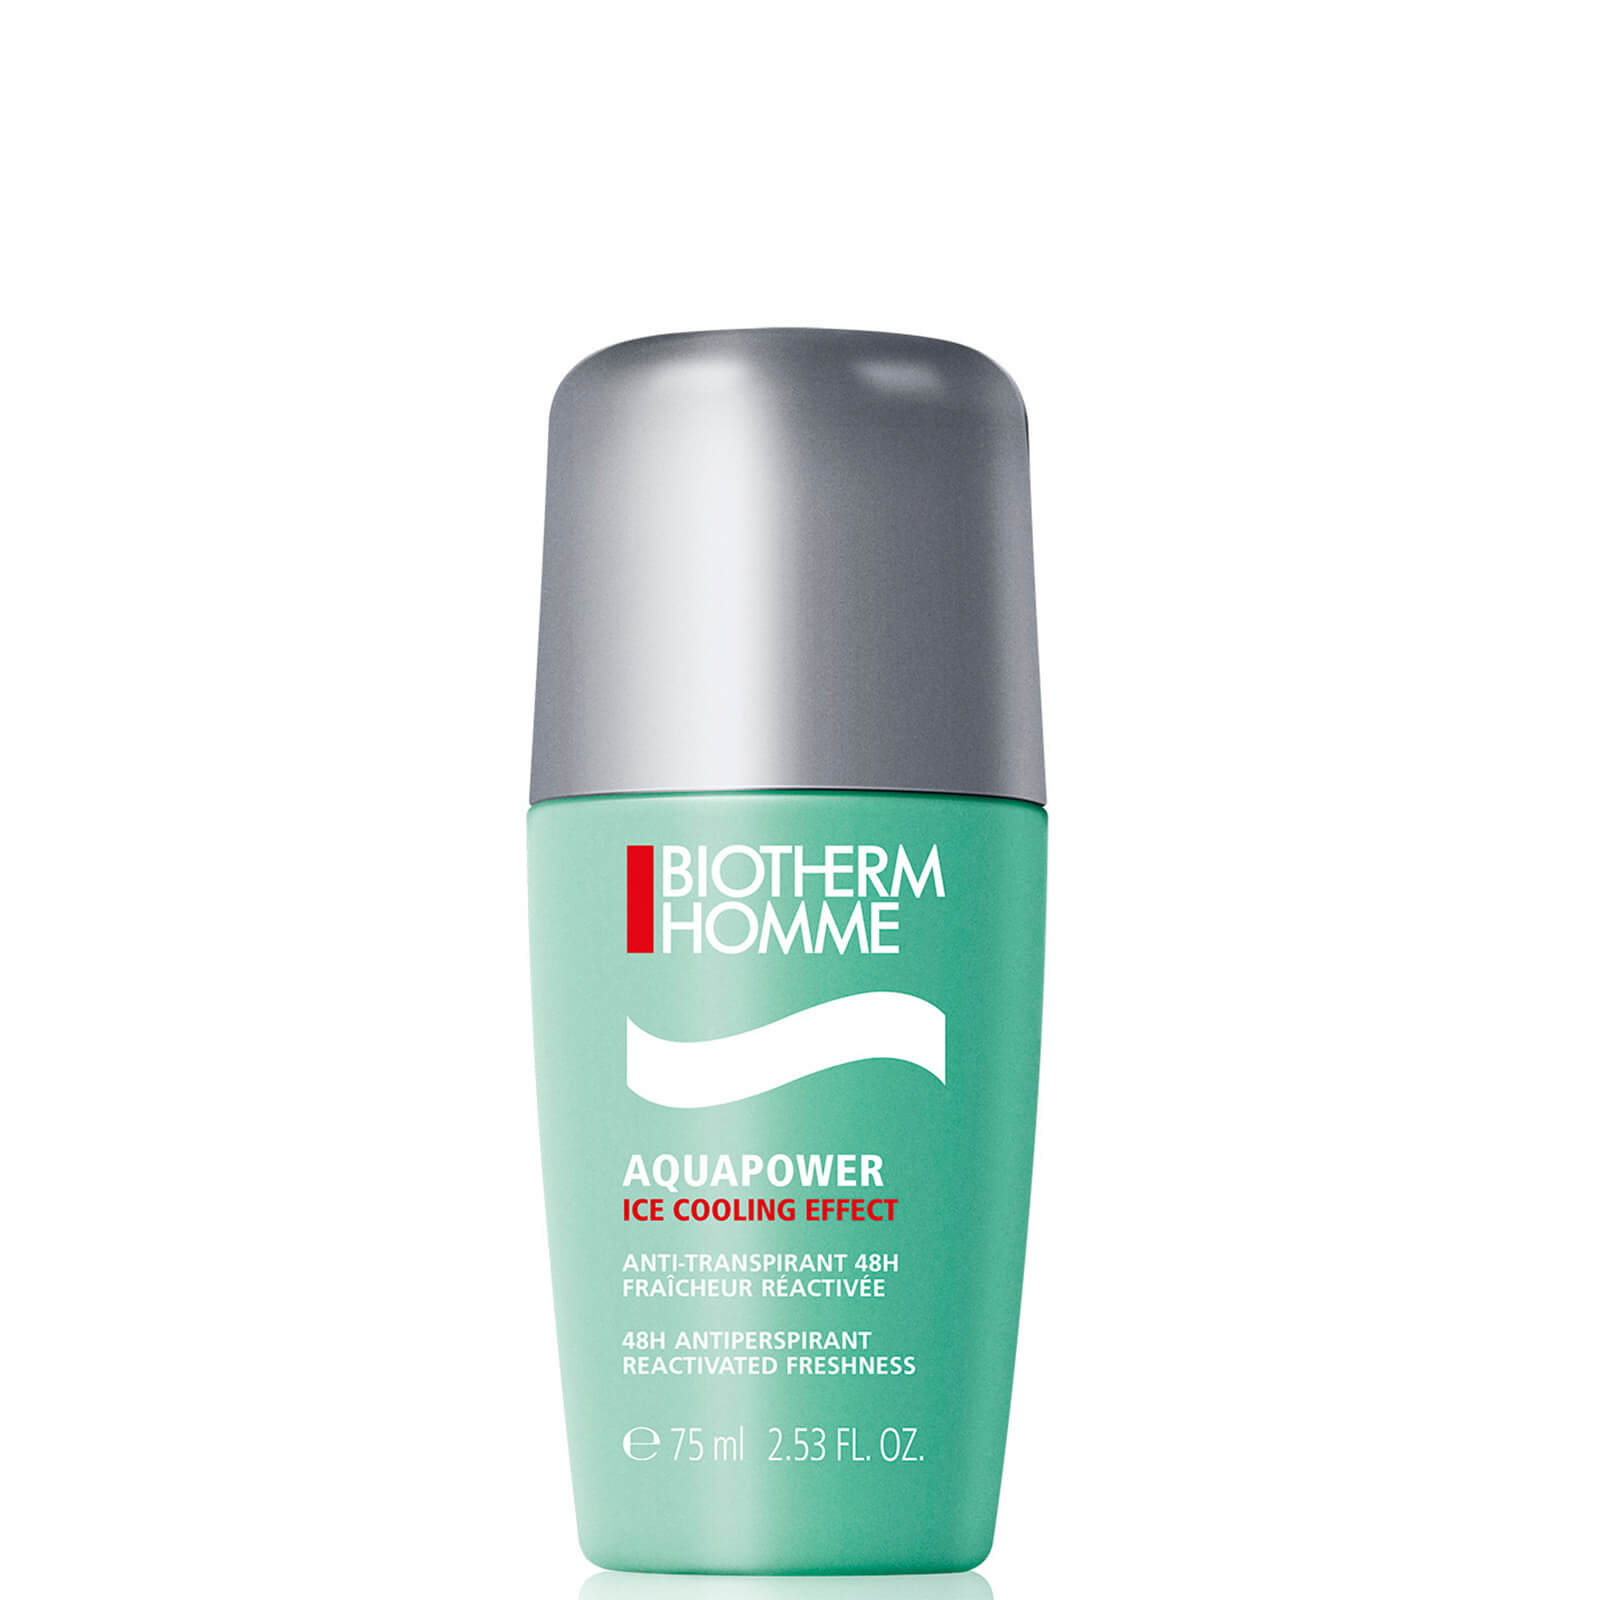 Image of Biotherm Aquapower Ice Cooling Effect 75ml